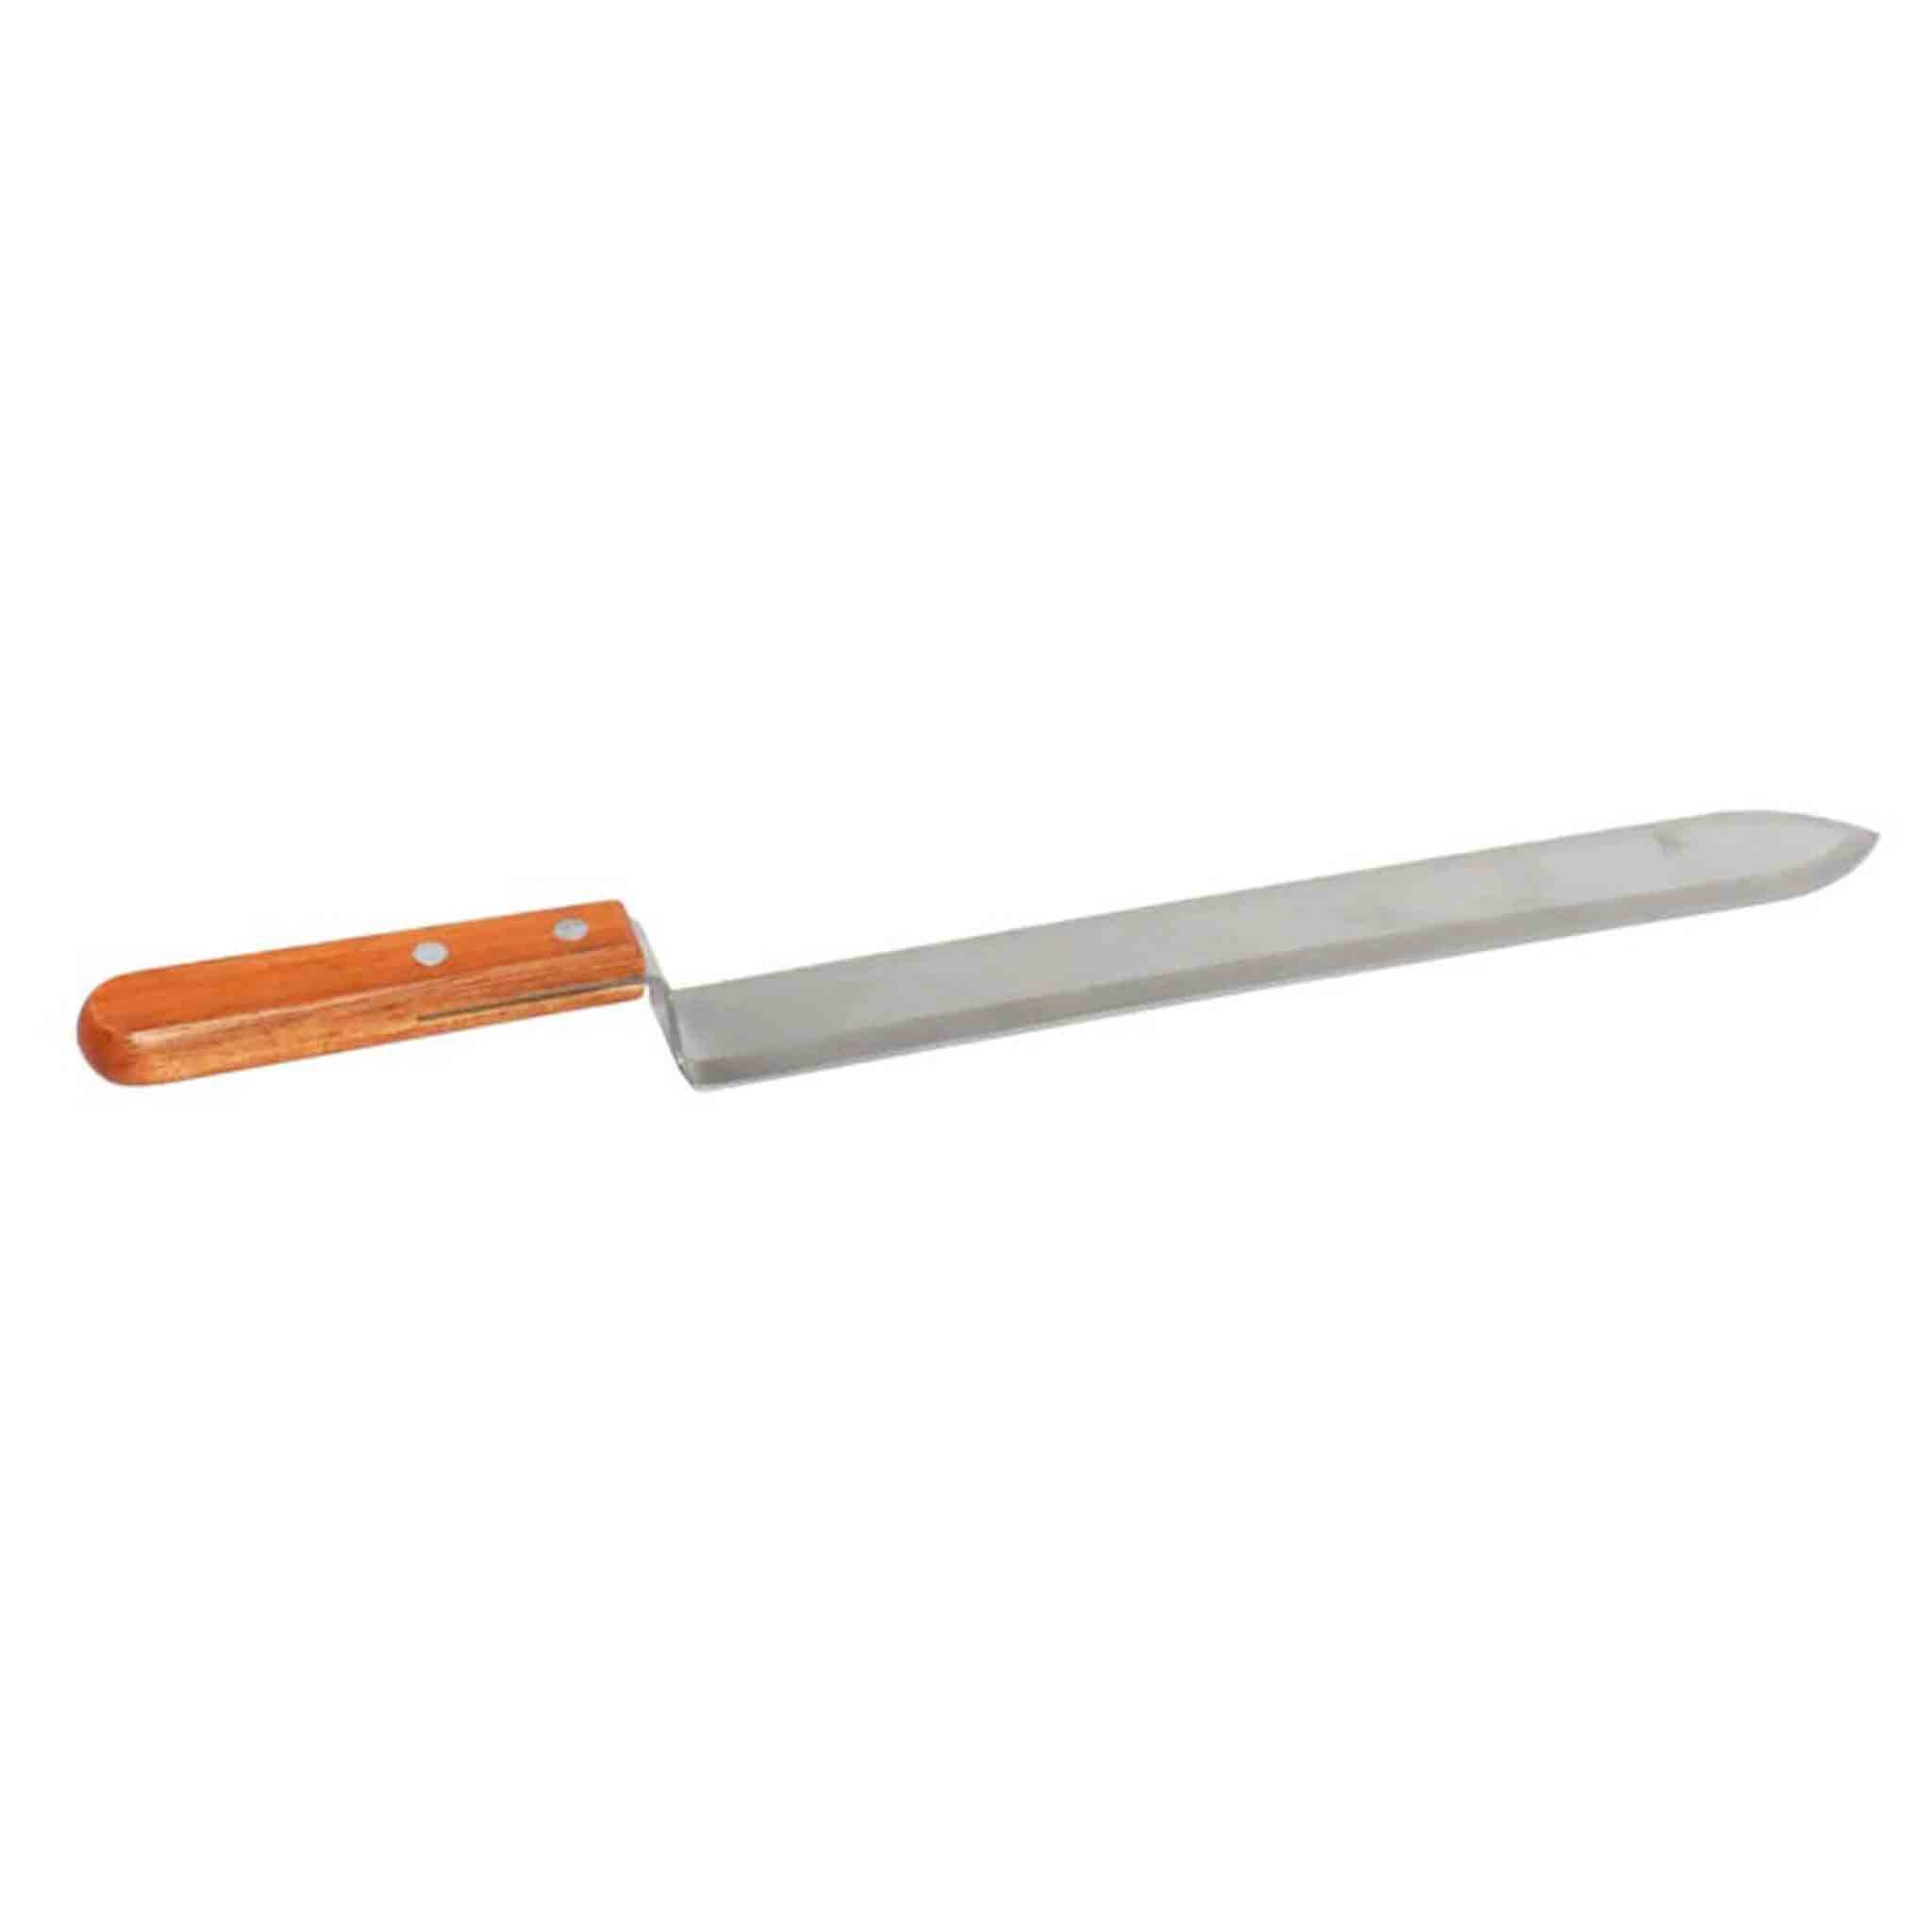 Beekeeping Scraper Knife with smooth edged blade. - Tools collection by Buzzbee Beekeeping Supplies